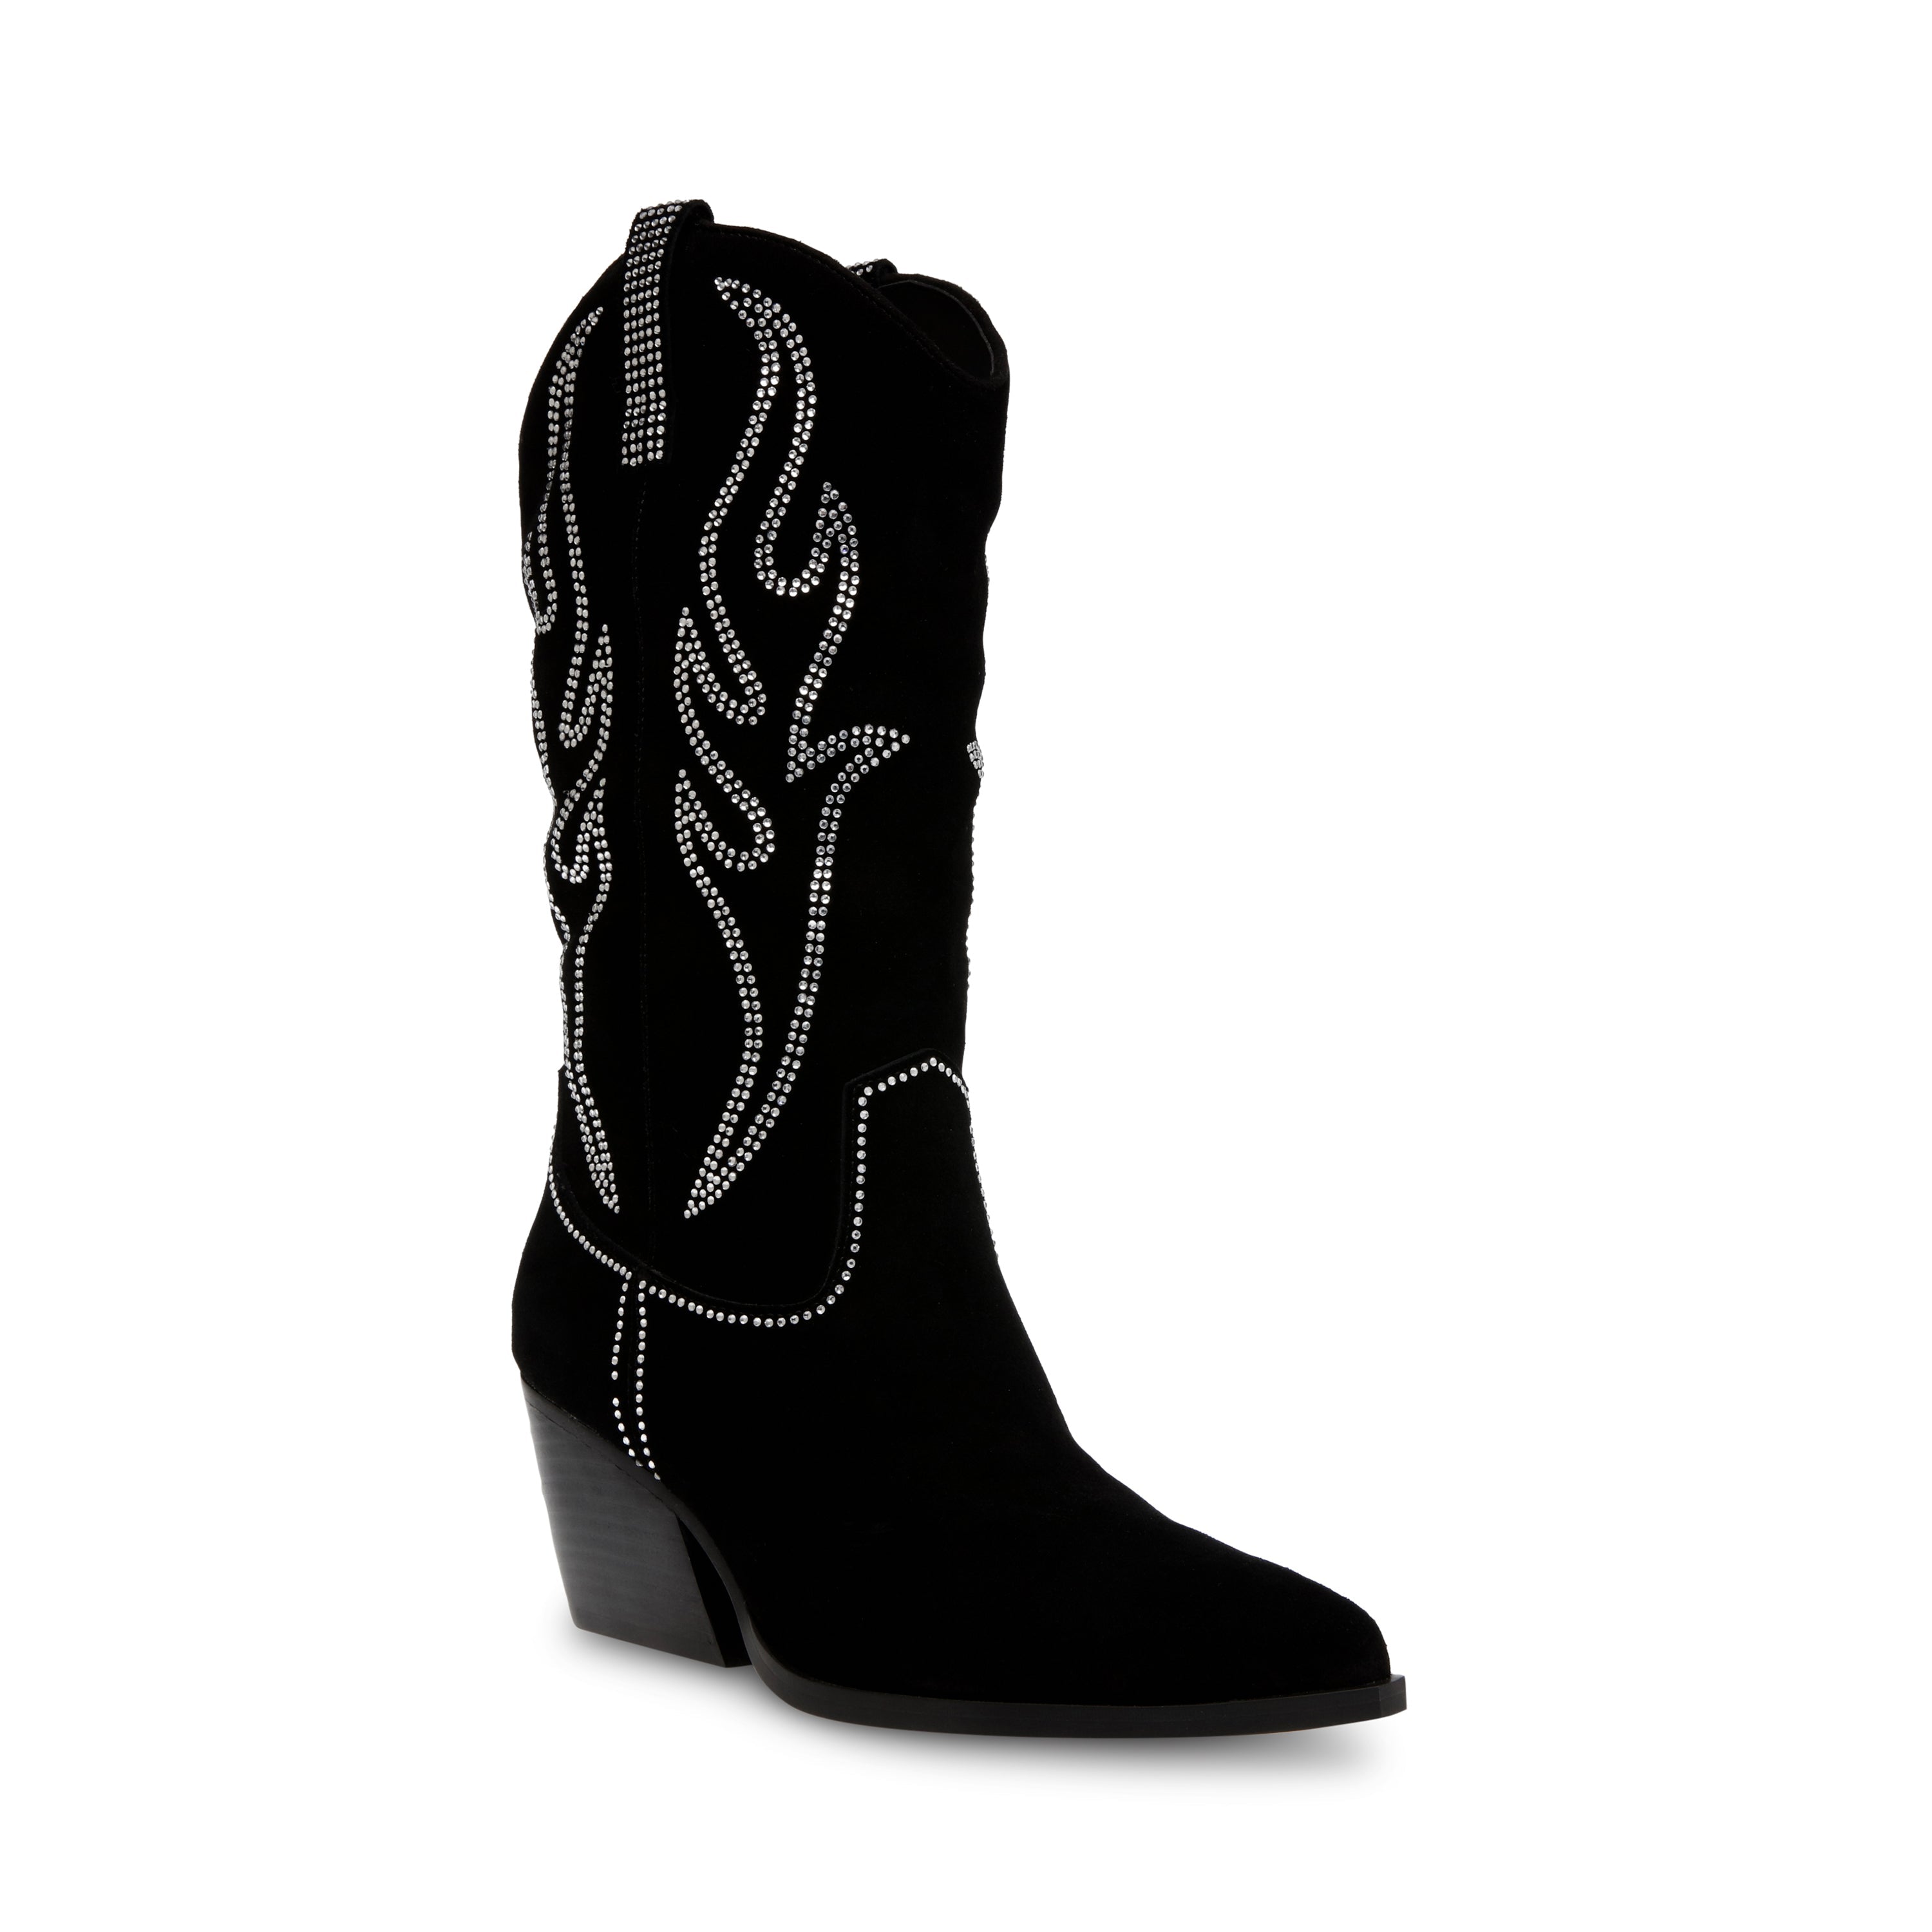 Walkover Boot Black Suede- Hover Image